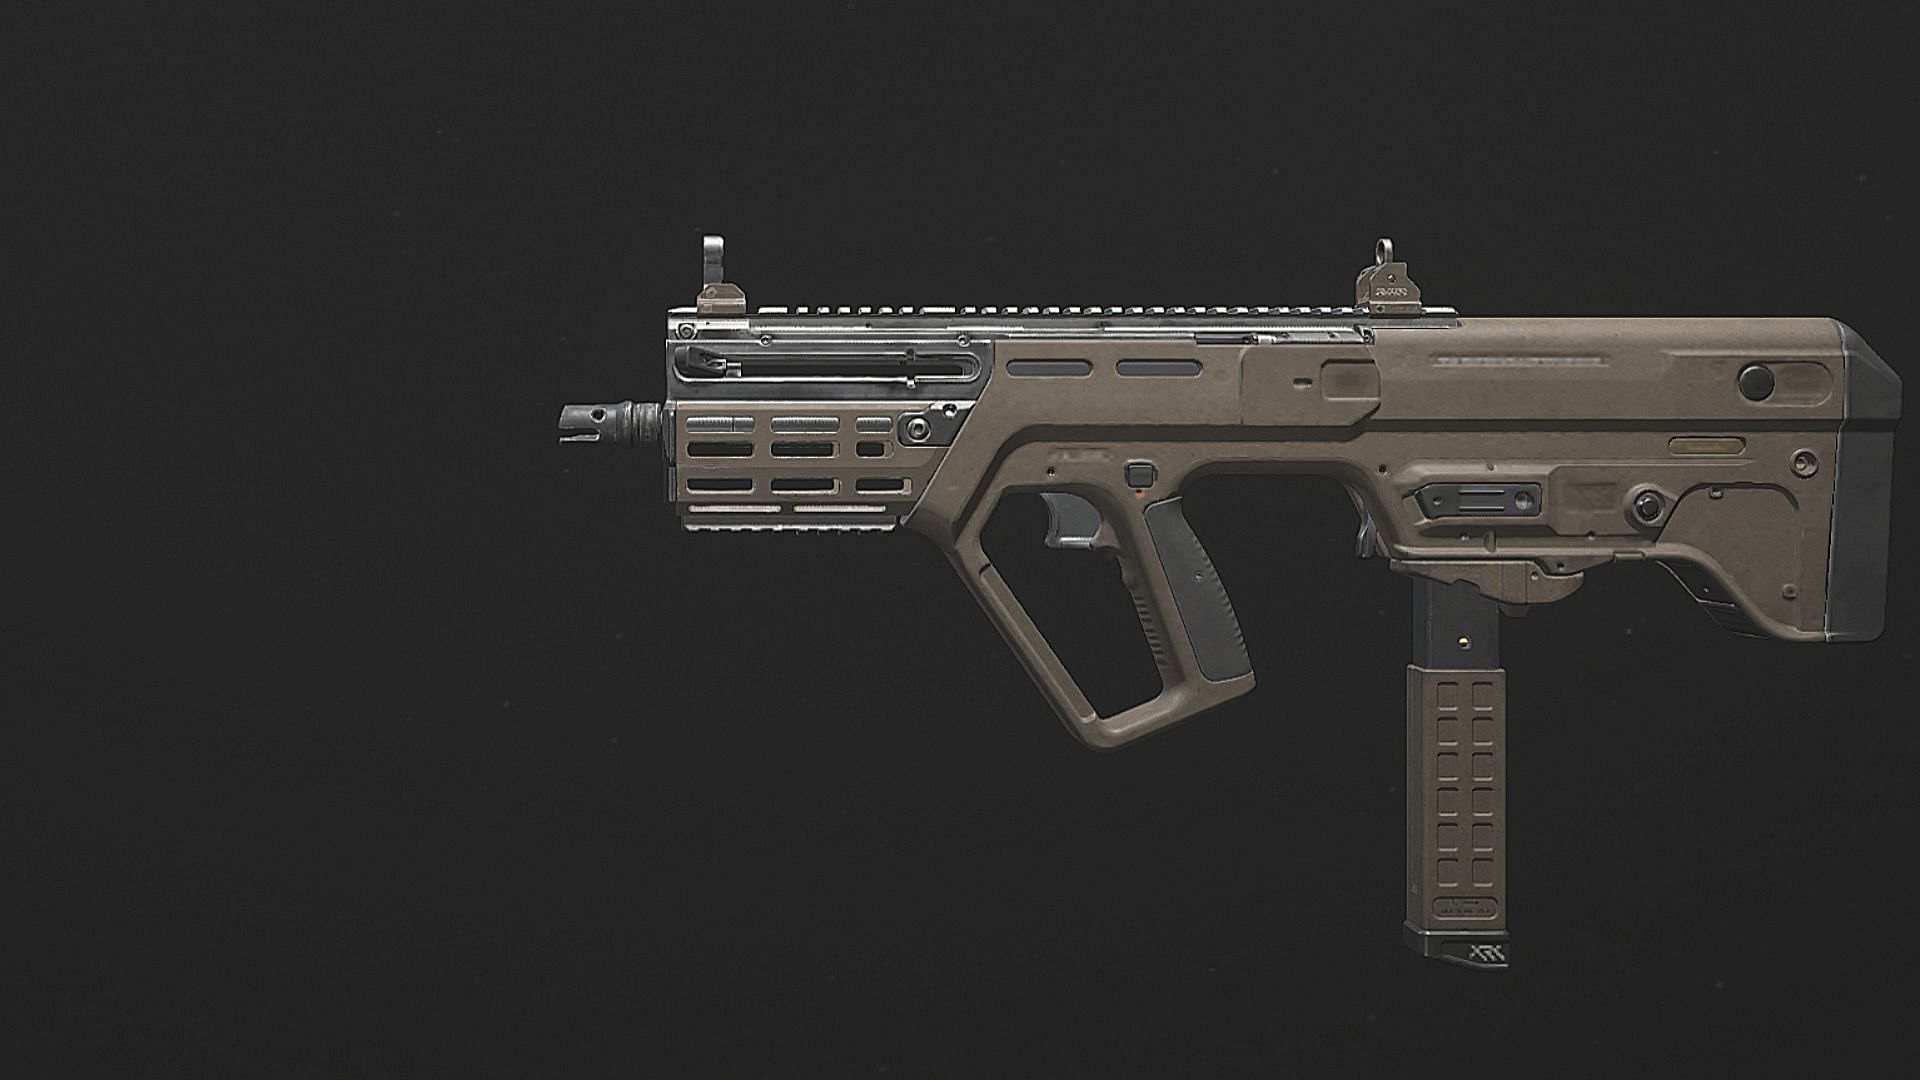 RAM-9 SMG weapon in Preview (Image via Activision)